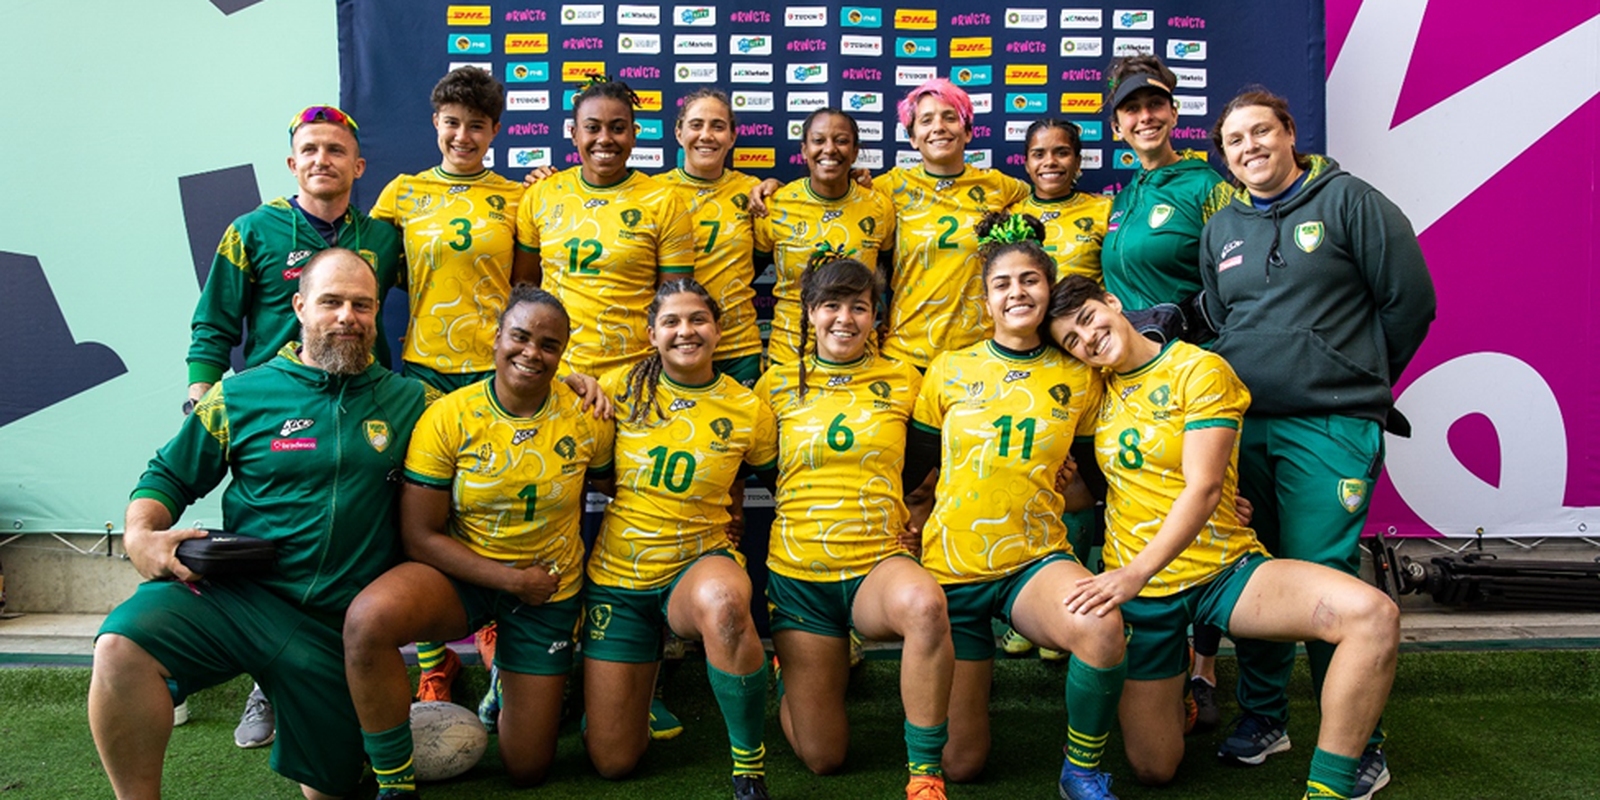 Brazil ends Women's Rugby World Cup in 11th place